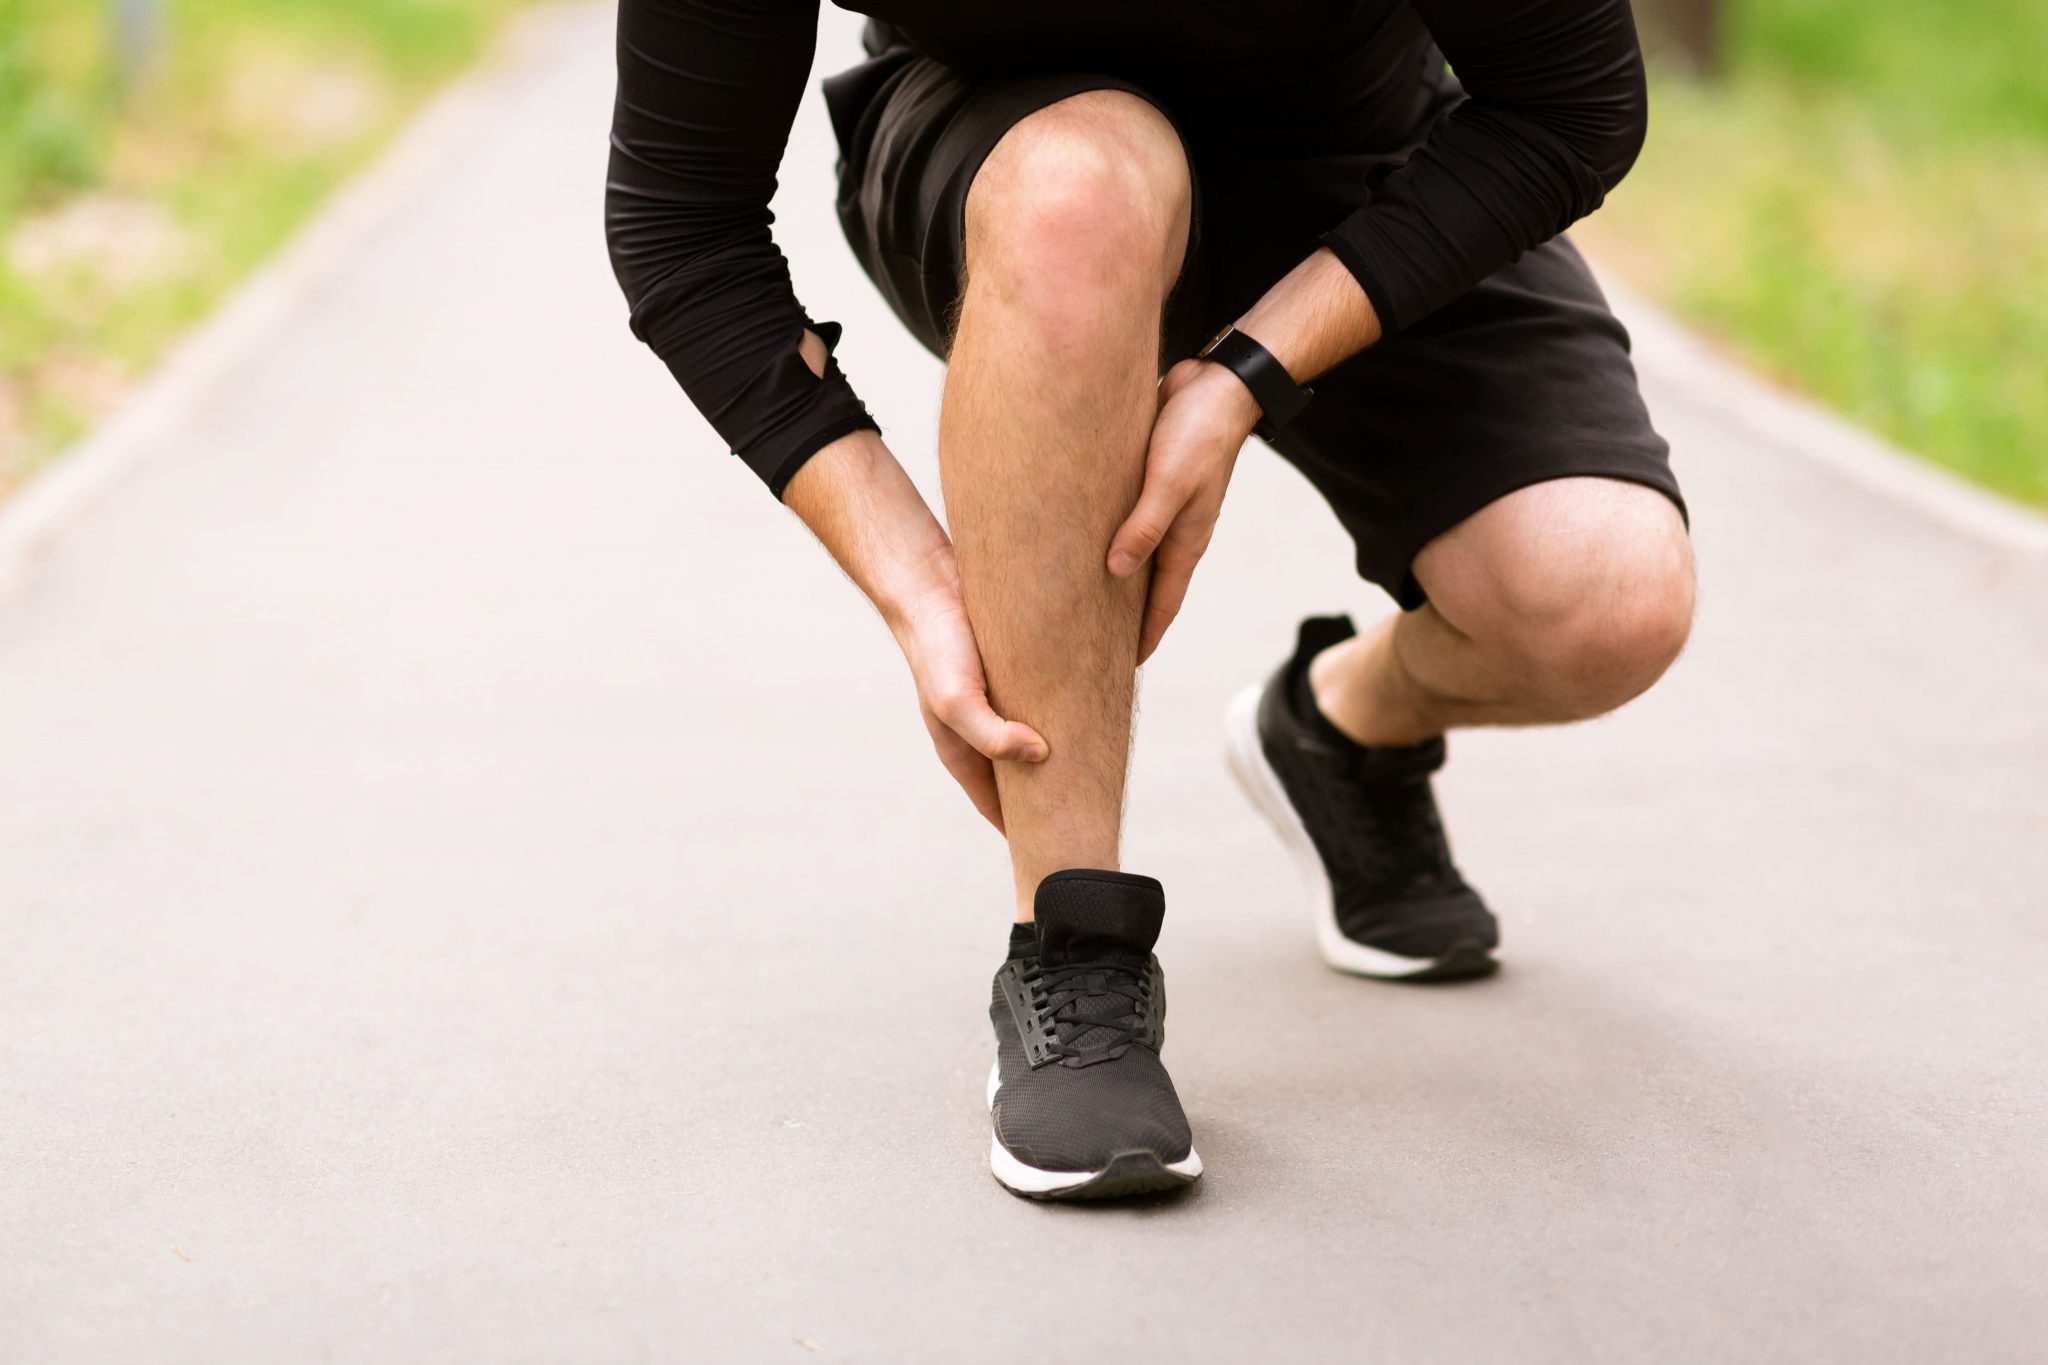 calf-sport-muscle-injury-runner-with-pain-in-leg-RNLQ7YT